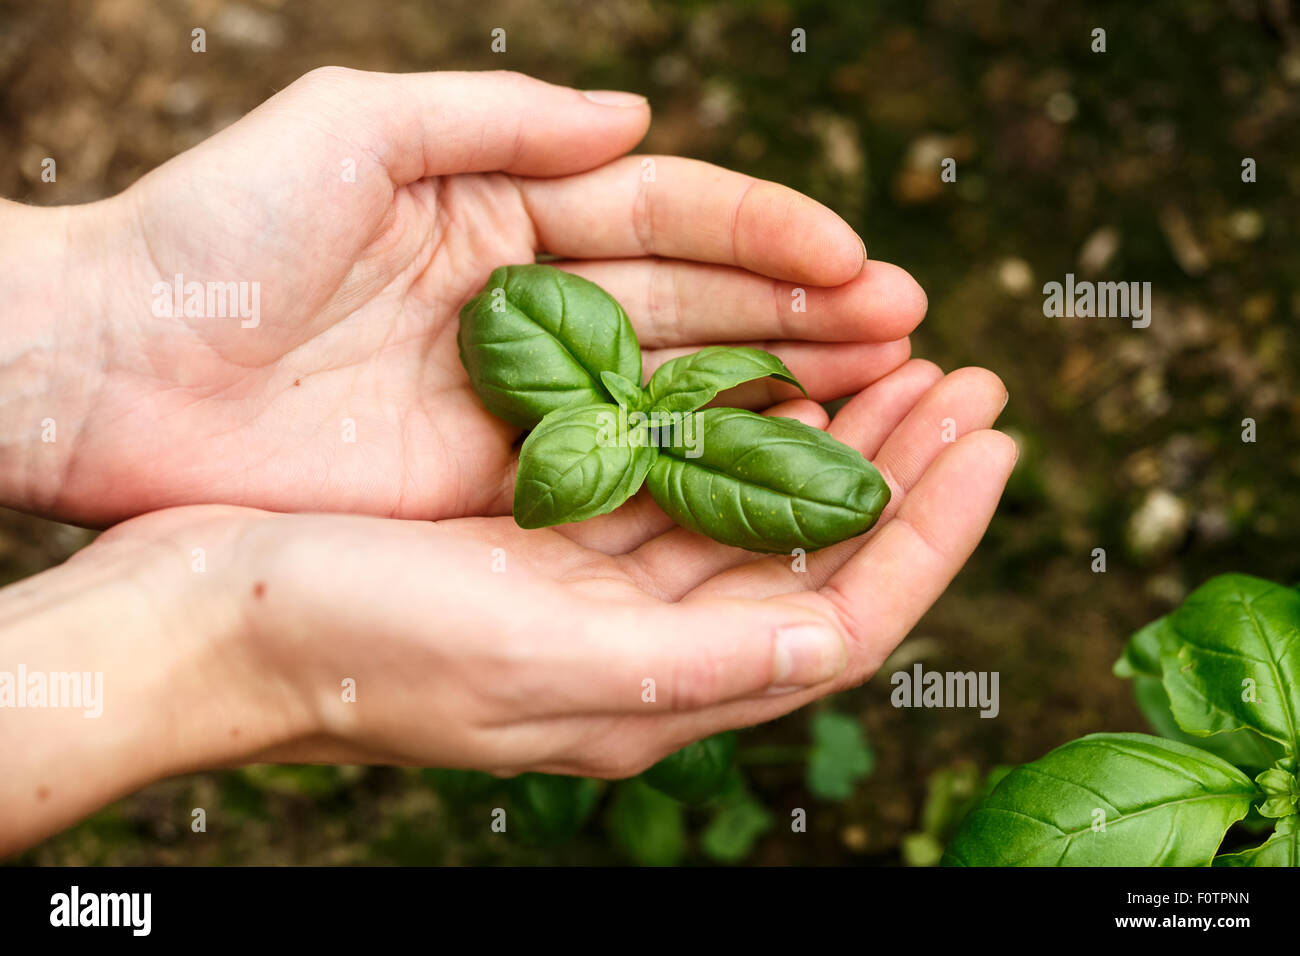 Female hands holding basil leaves. Locavore, clean eating,organic agriculture, growing,harvesting concept Stock Photo